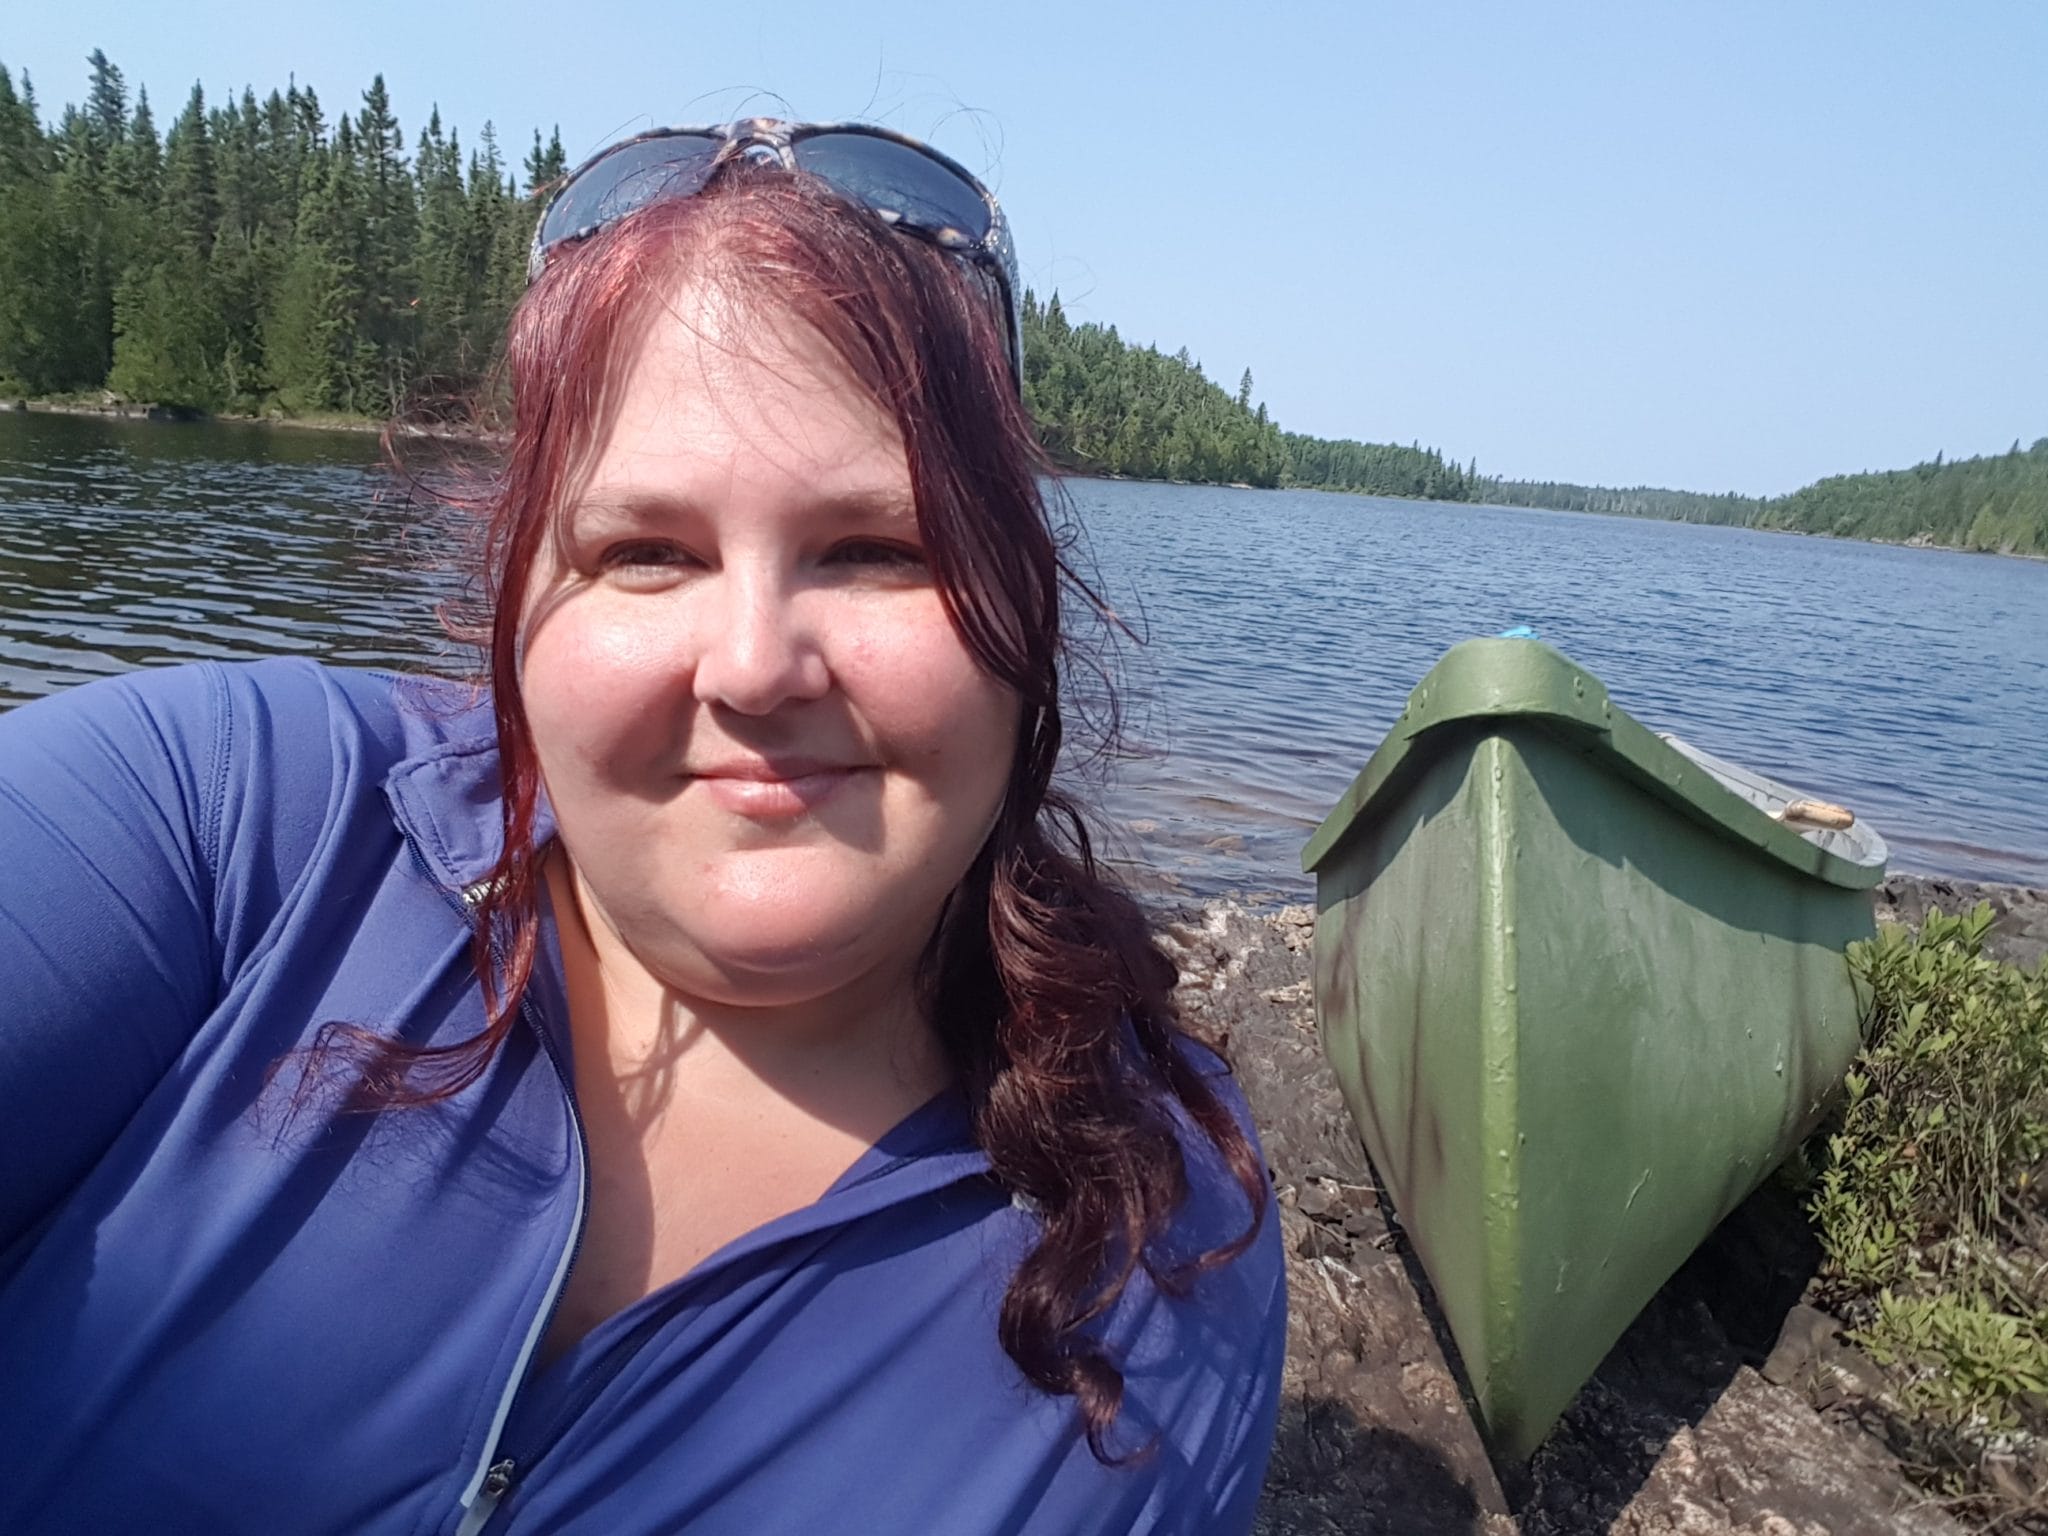 Woman with sunglasses on her head smiles at the camera near a green canoe by a lake with forest in the background.